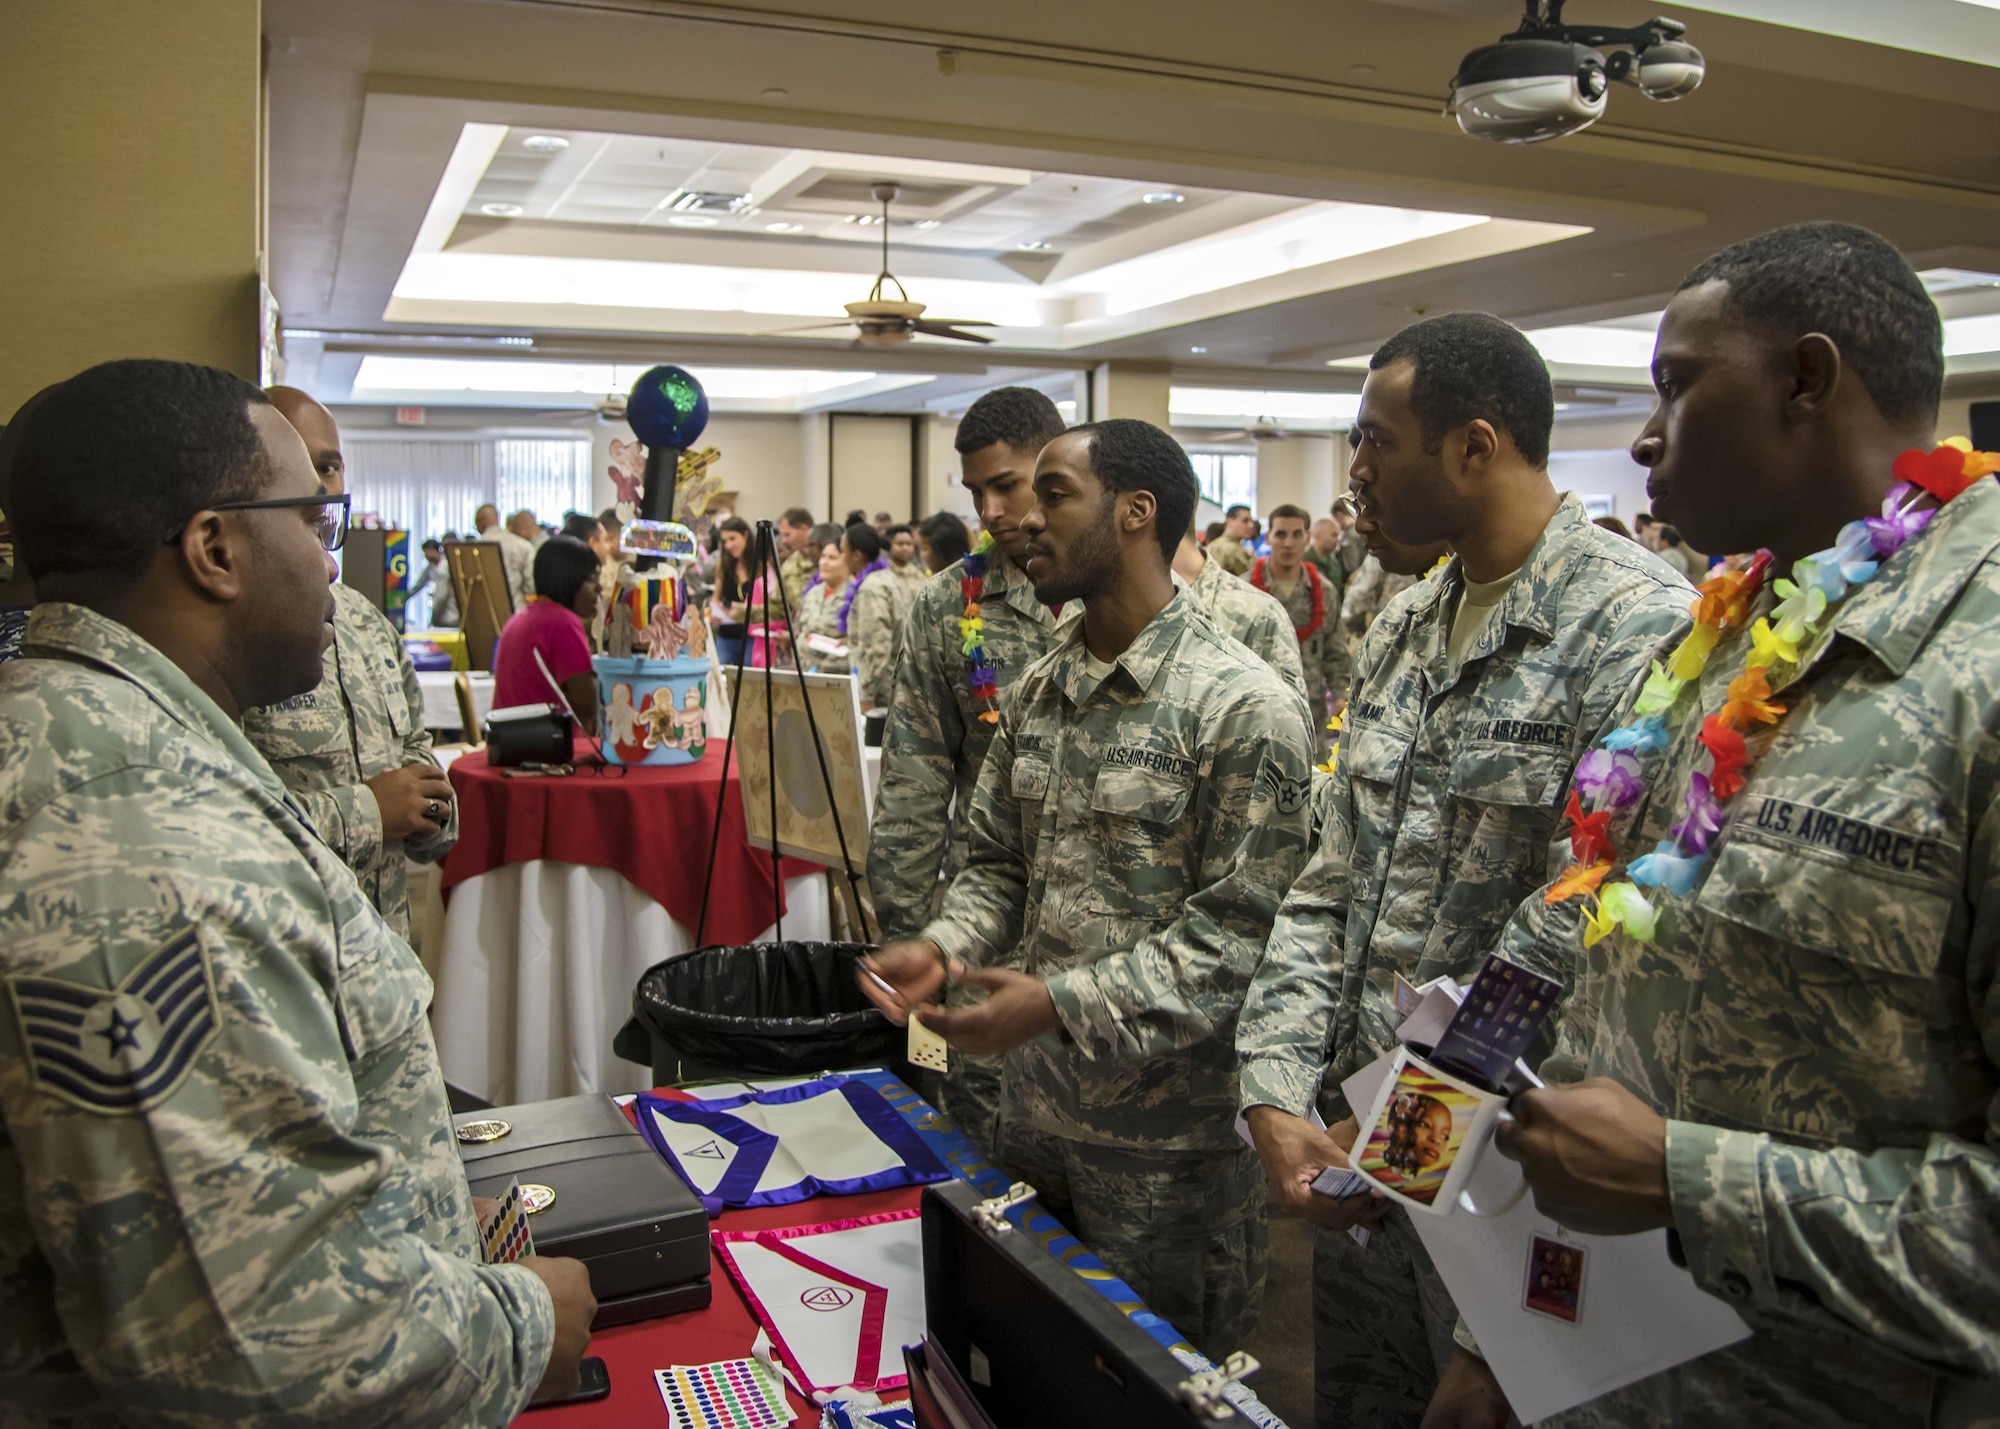 Airmen learn about a new culture from Tech Sgt. Willie Neal, 23d Maintenance Squadron munitions specialist during Diversity Day, Sept. 29, 2017, at Moody Air Force Base, Ga. Moody held Diversity Day to honor and educate Airmen on all of the ethnic groups and organizations observed by the Department of Defense. (U.S. Air Force Photo by Airman Eugene Oliver)